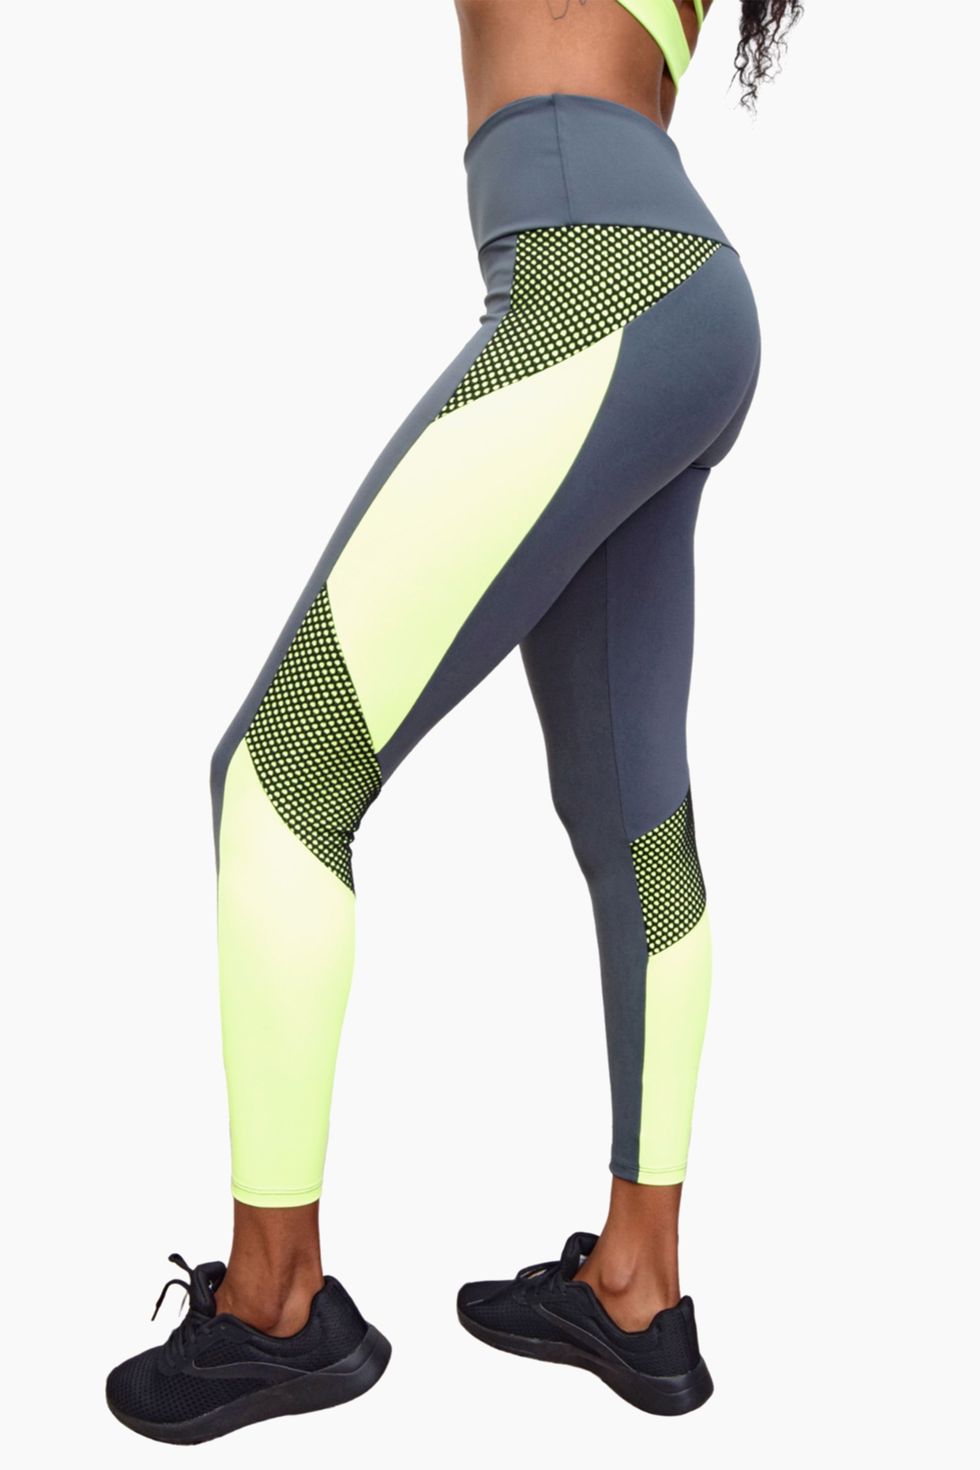 The Best Workout Leggings to Keep in Your Rotation - V Magazine